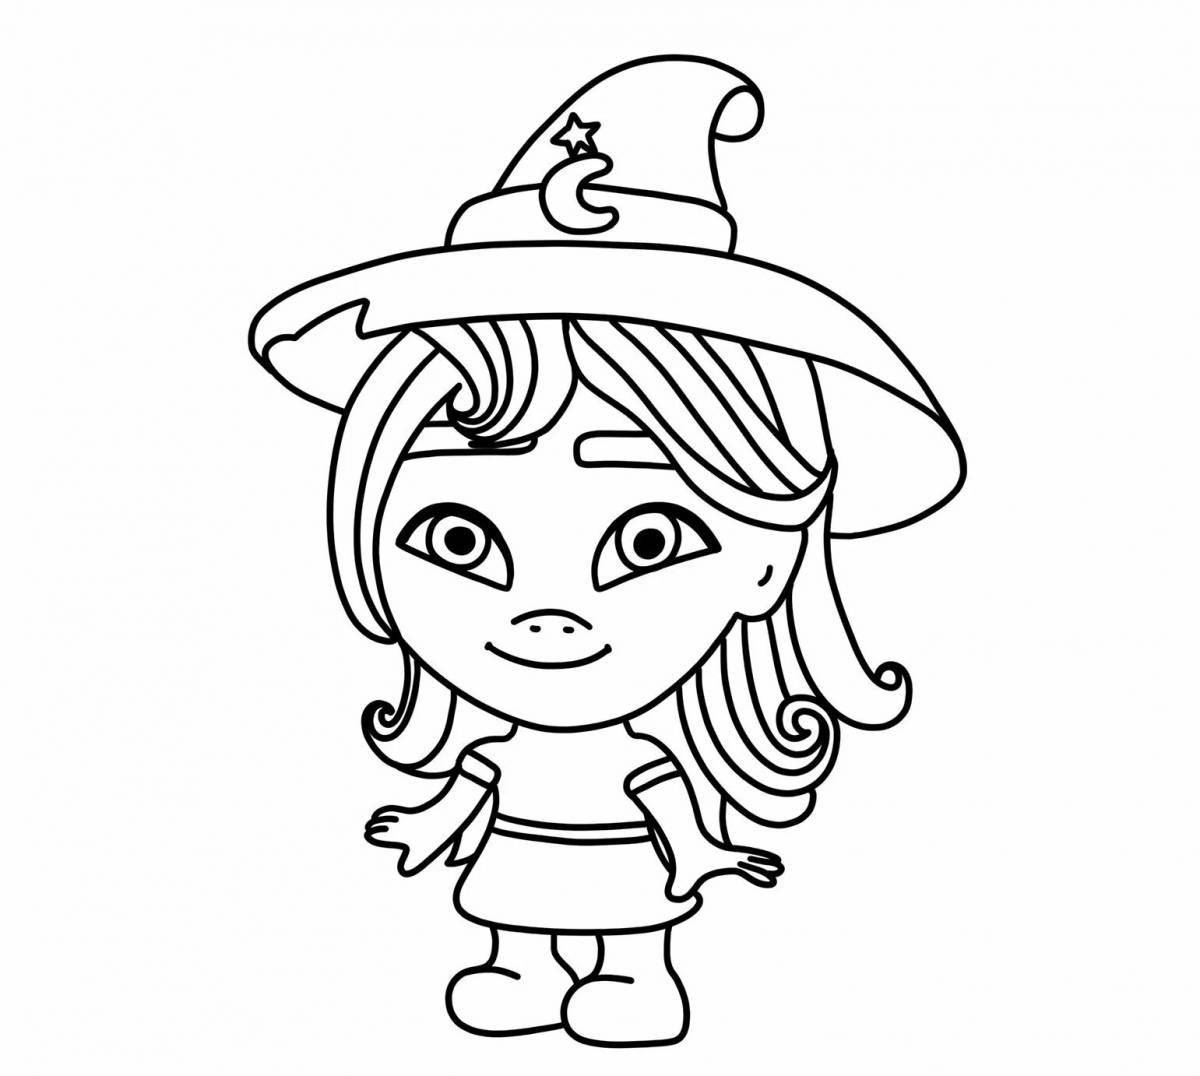 Super monsters glitter coloring pages